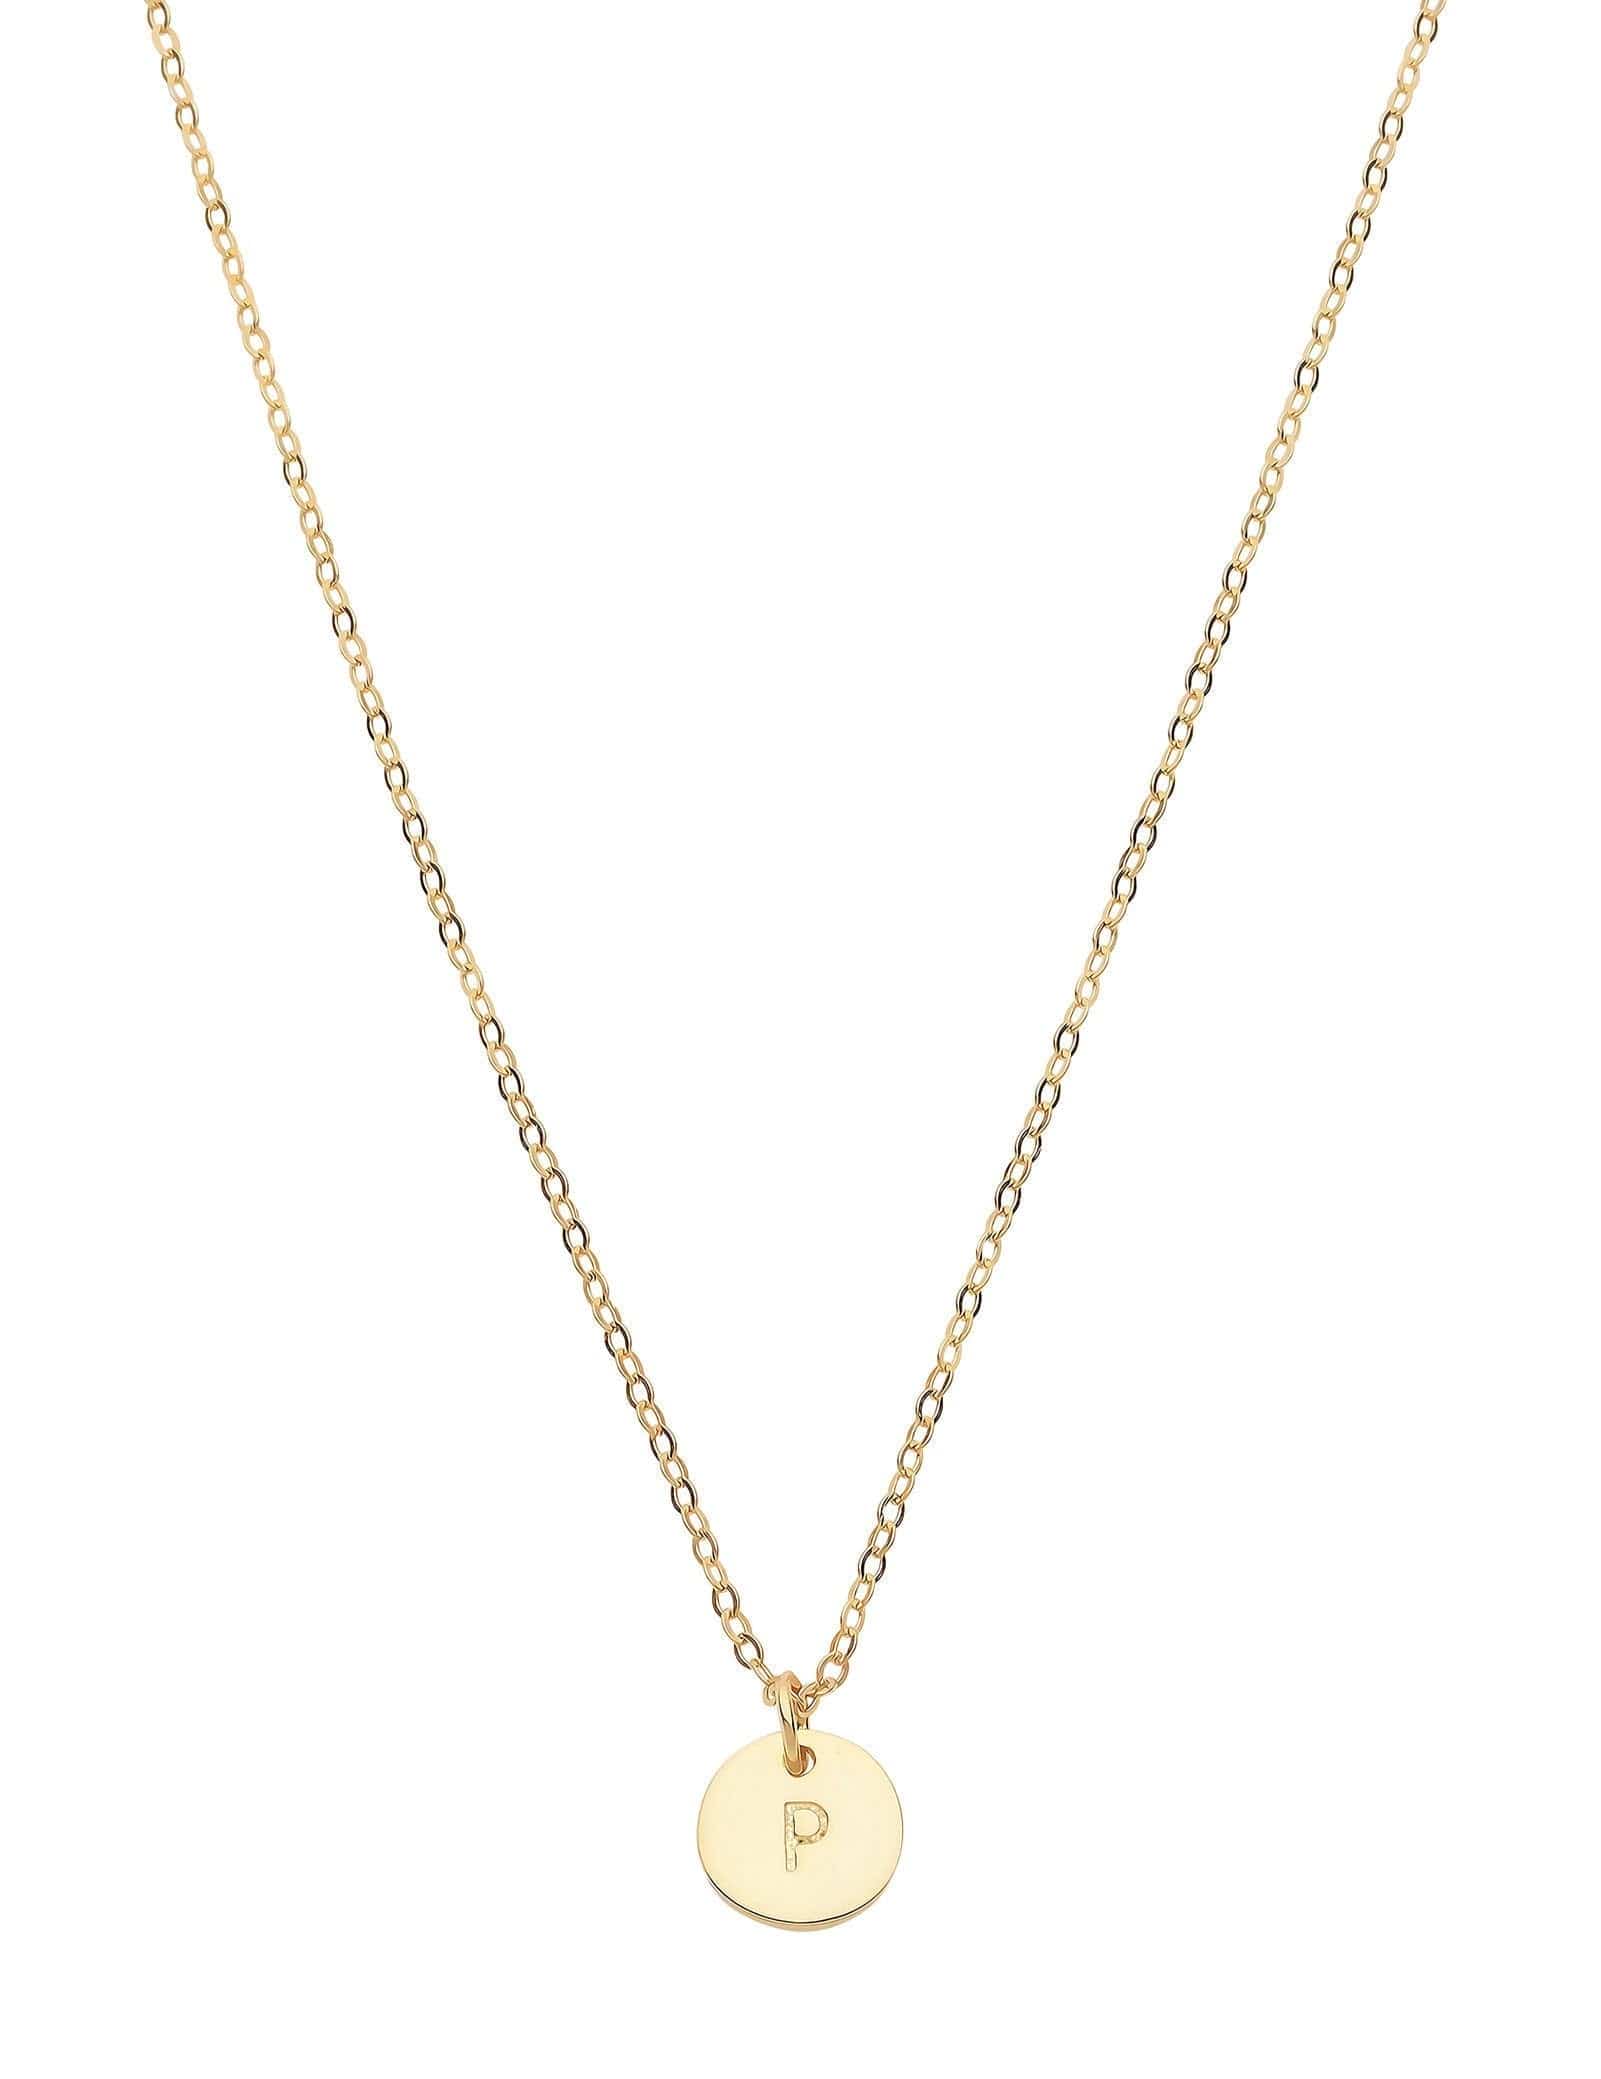 Dear Addison Yellow Gold Letter P Necklace